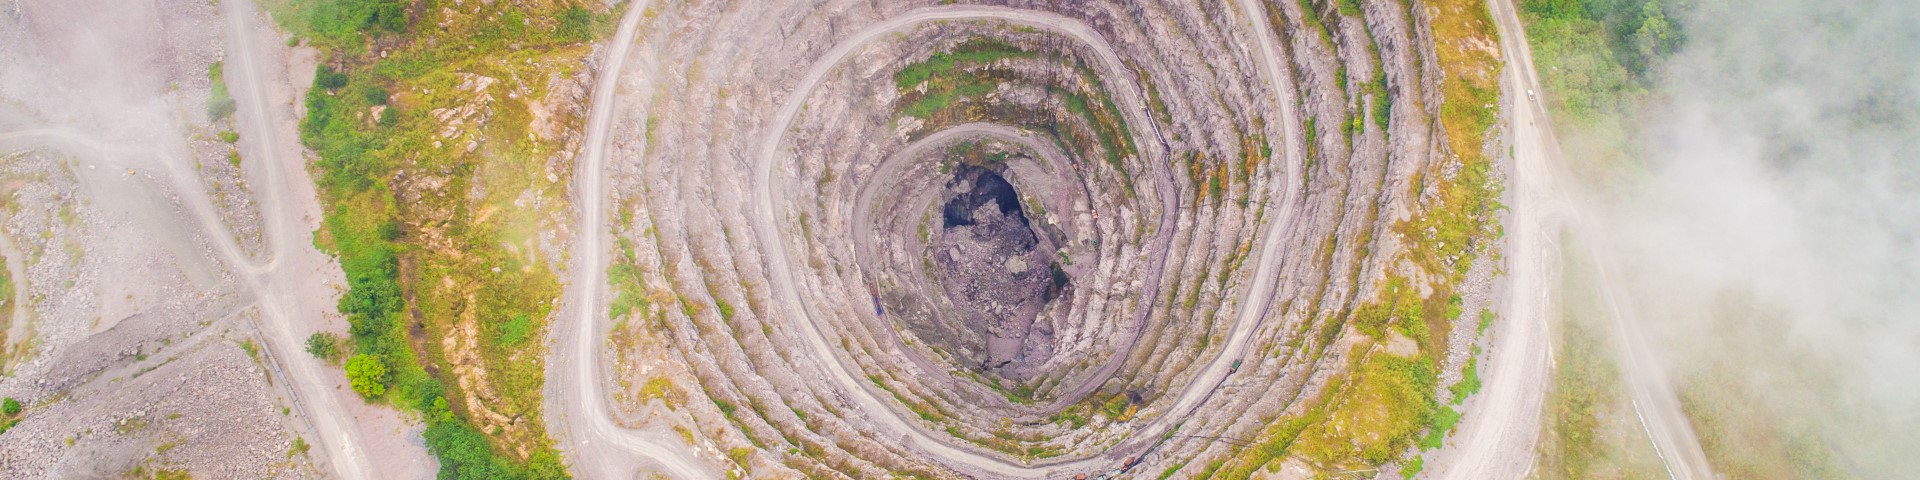 An aerial image of a rocky, spiral-shaped opening in the ground.